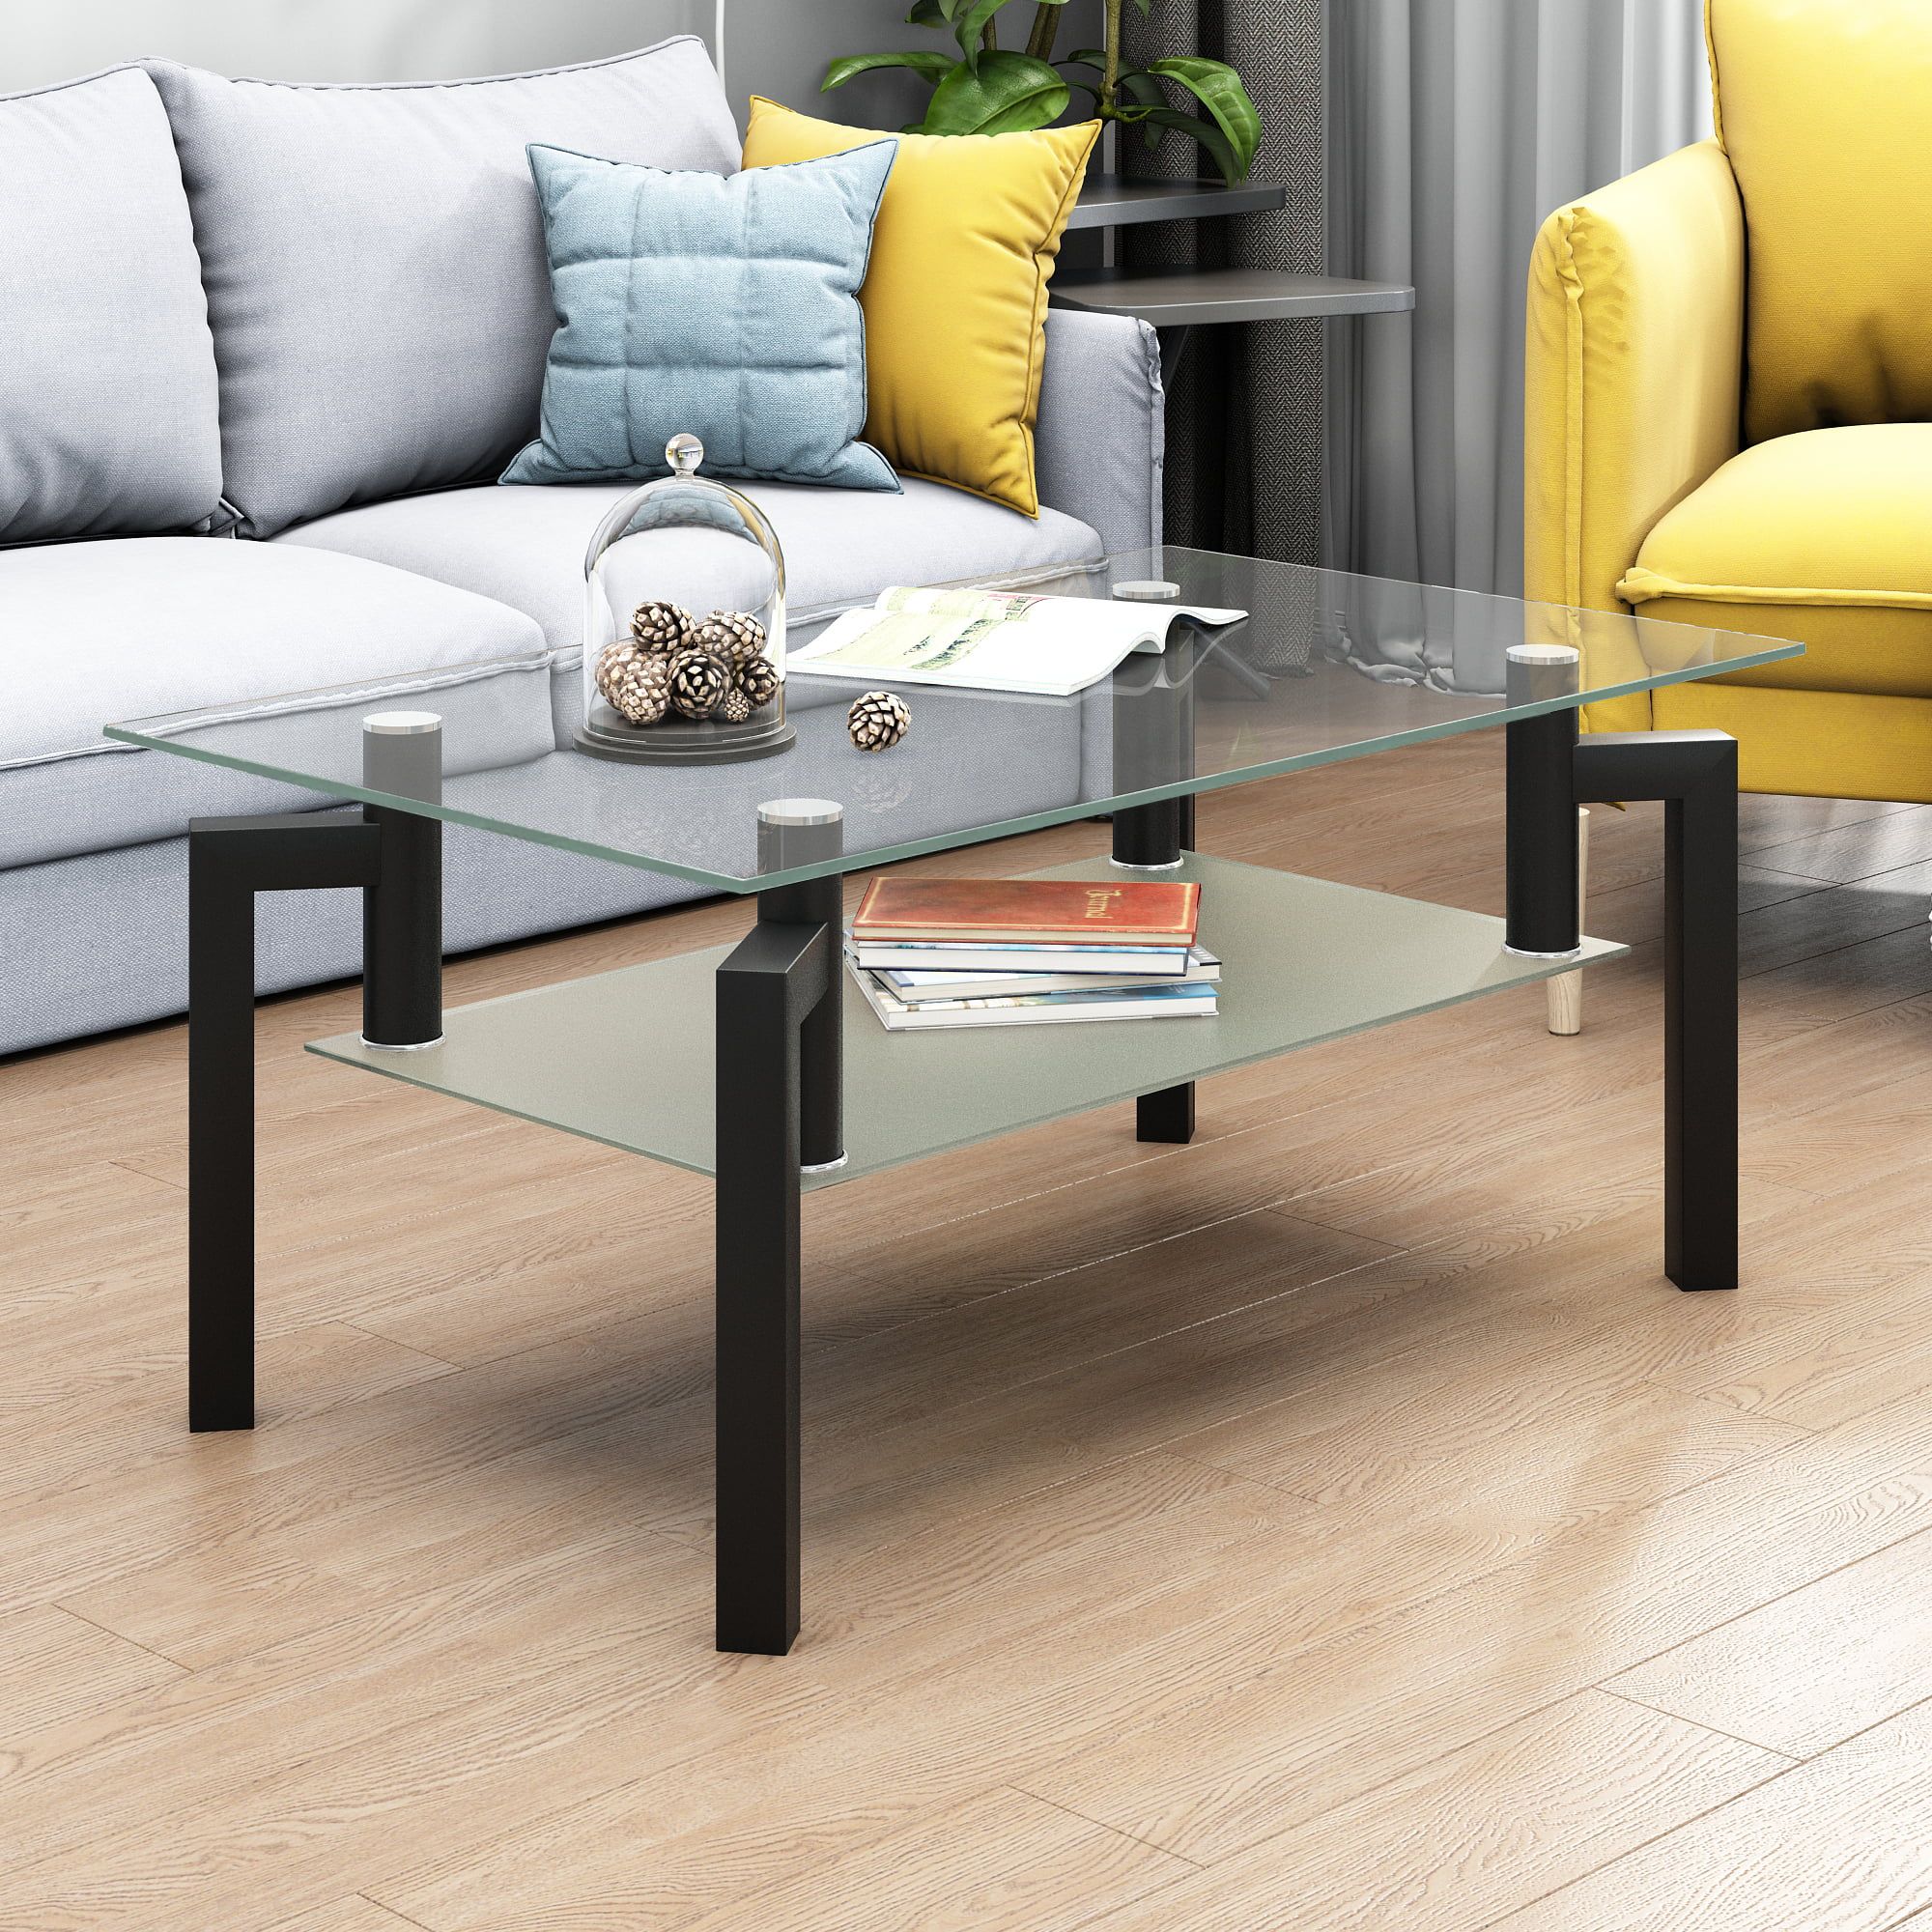 2 Tier Glass Coffee Table, Rectangle Open Shelf Coffee Accent Table, Living  Room Table With Glass Shelf, Large Storage Space Cocktail Table, Center  Table With Wooden Legs For Home Office, B1258 – Walmart For Glass Open Shelf Coffee Tables (View 10 of 20)